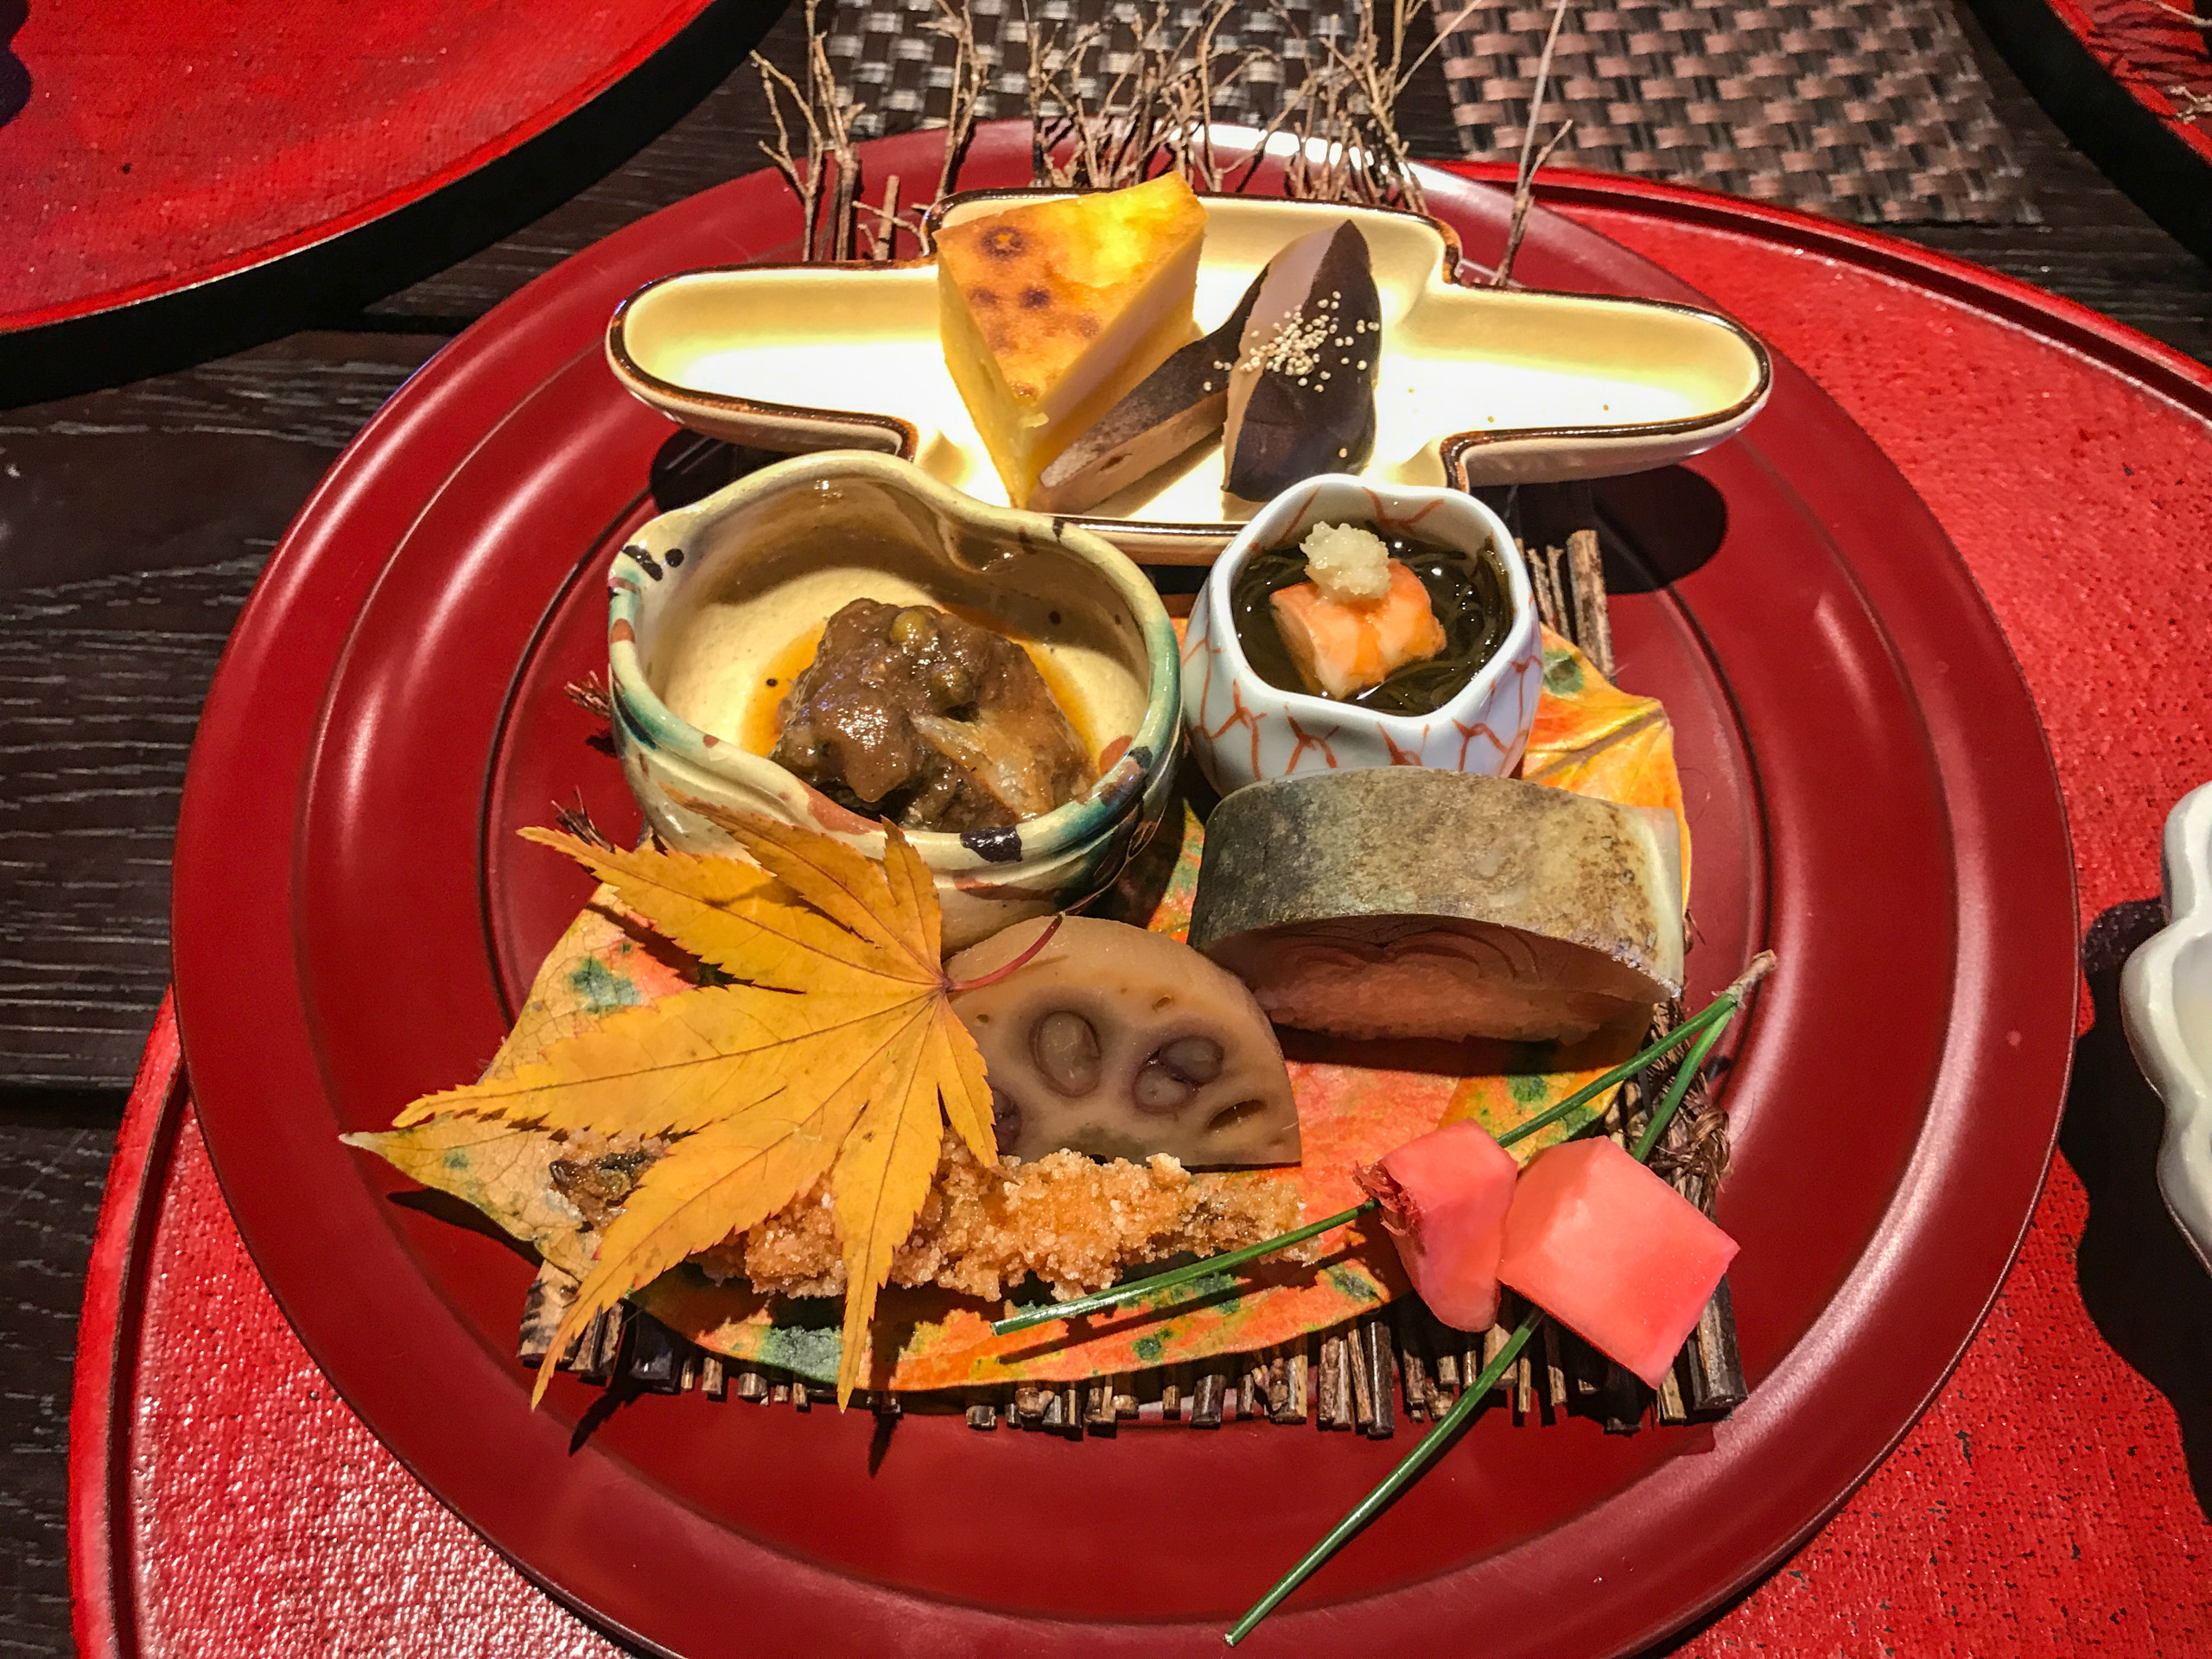 Lunch at Obuse, Japan